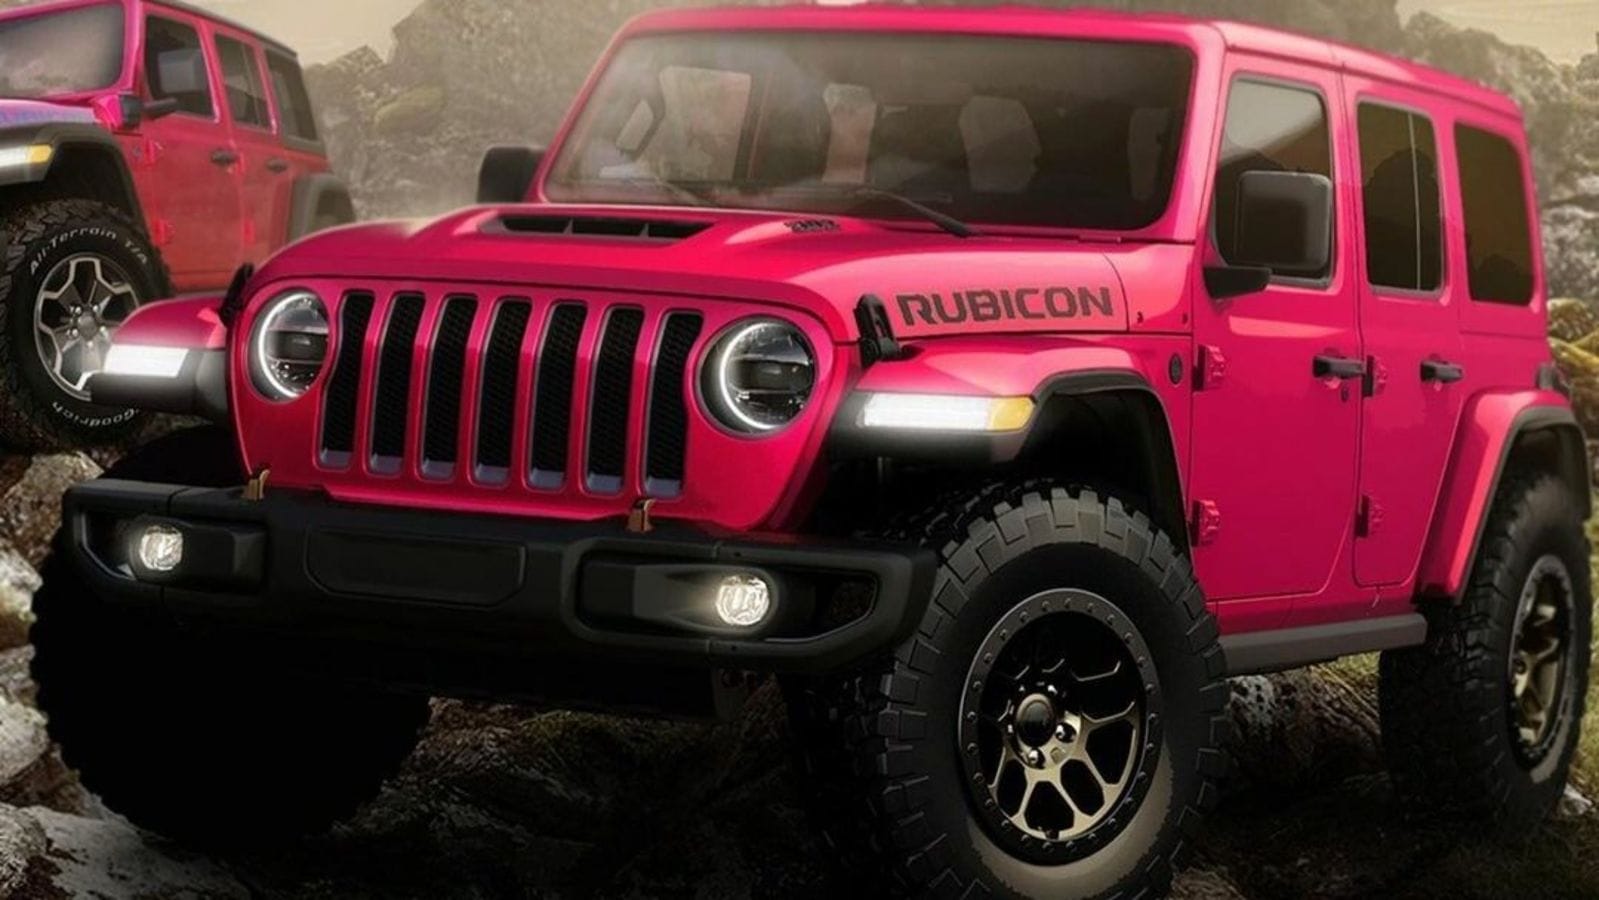 New Jeep Wrangler now comes in Tuscadero Pink colour HT Auto